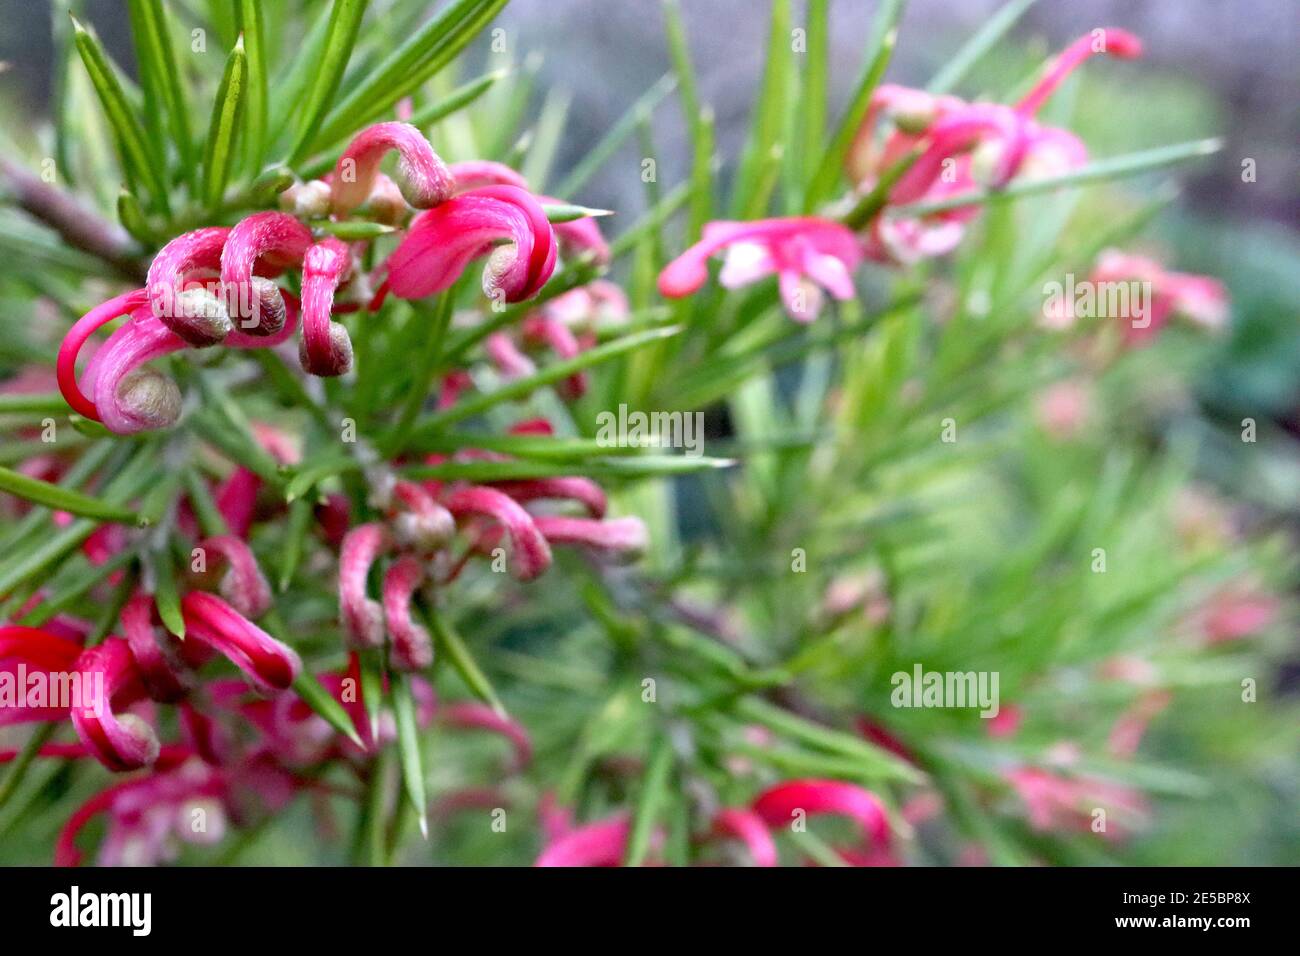 Grevillea rosmarinifolia Rosemary grevillea - pink Spider flower – coiled deep pink flowers with needle-like leaves,  January, England, UK Stock Photo